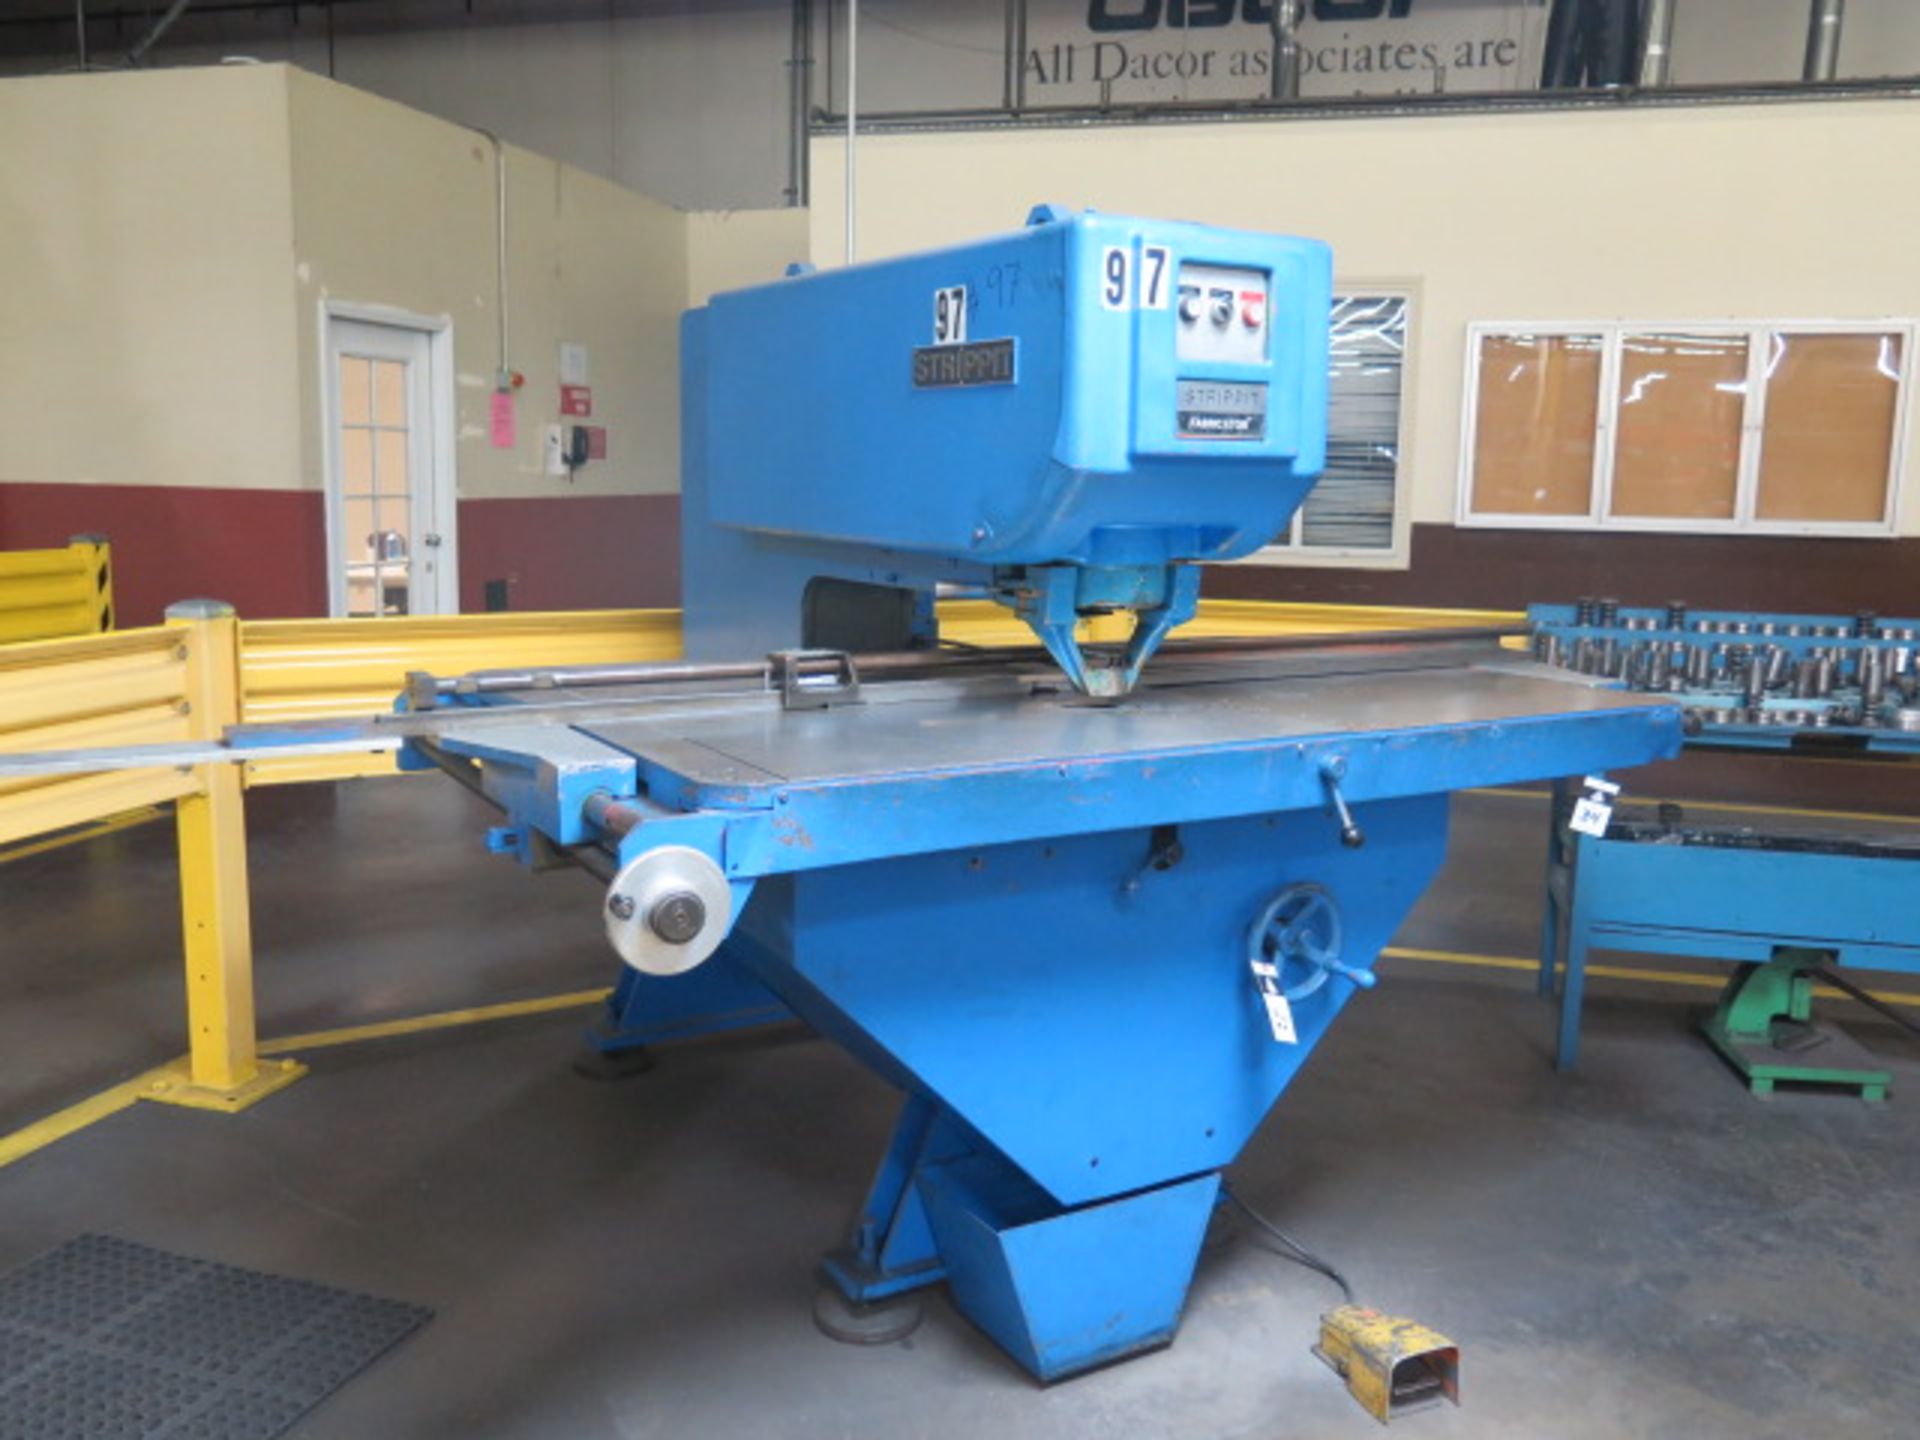 Strippit Super 30/30 30-Ton Production Stamping Press s/n 153372777 (SOLD AS-IS - NO WARRANTY) - Image 3 of 9